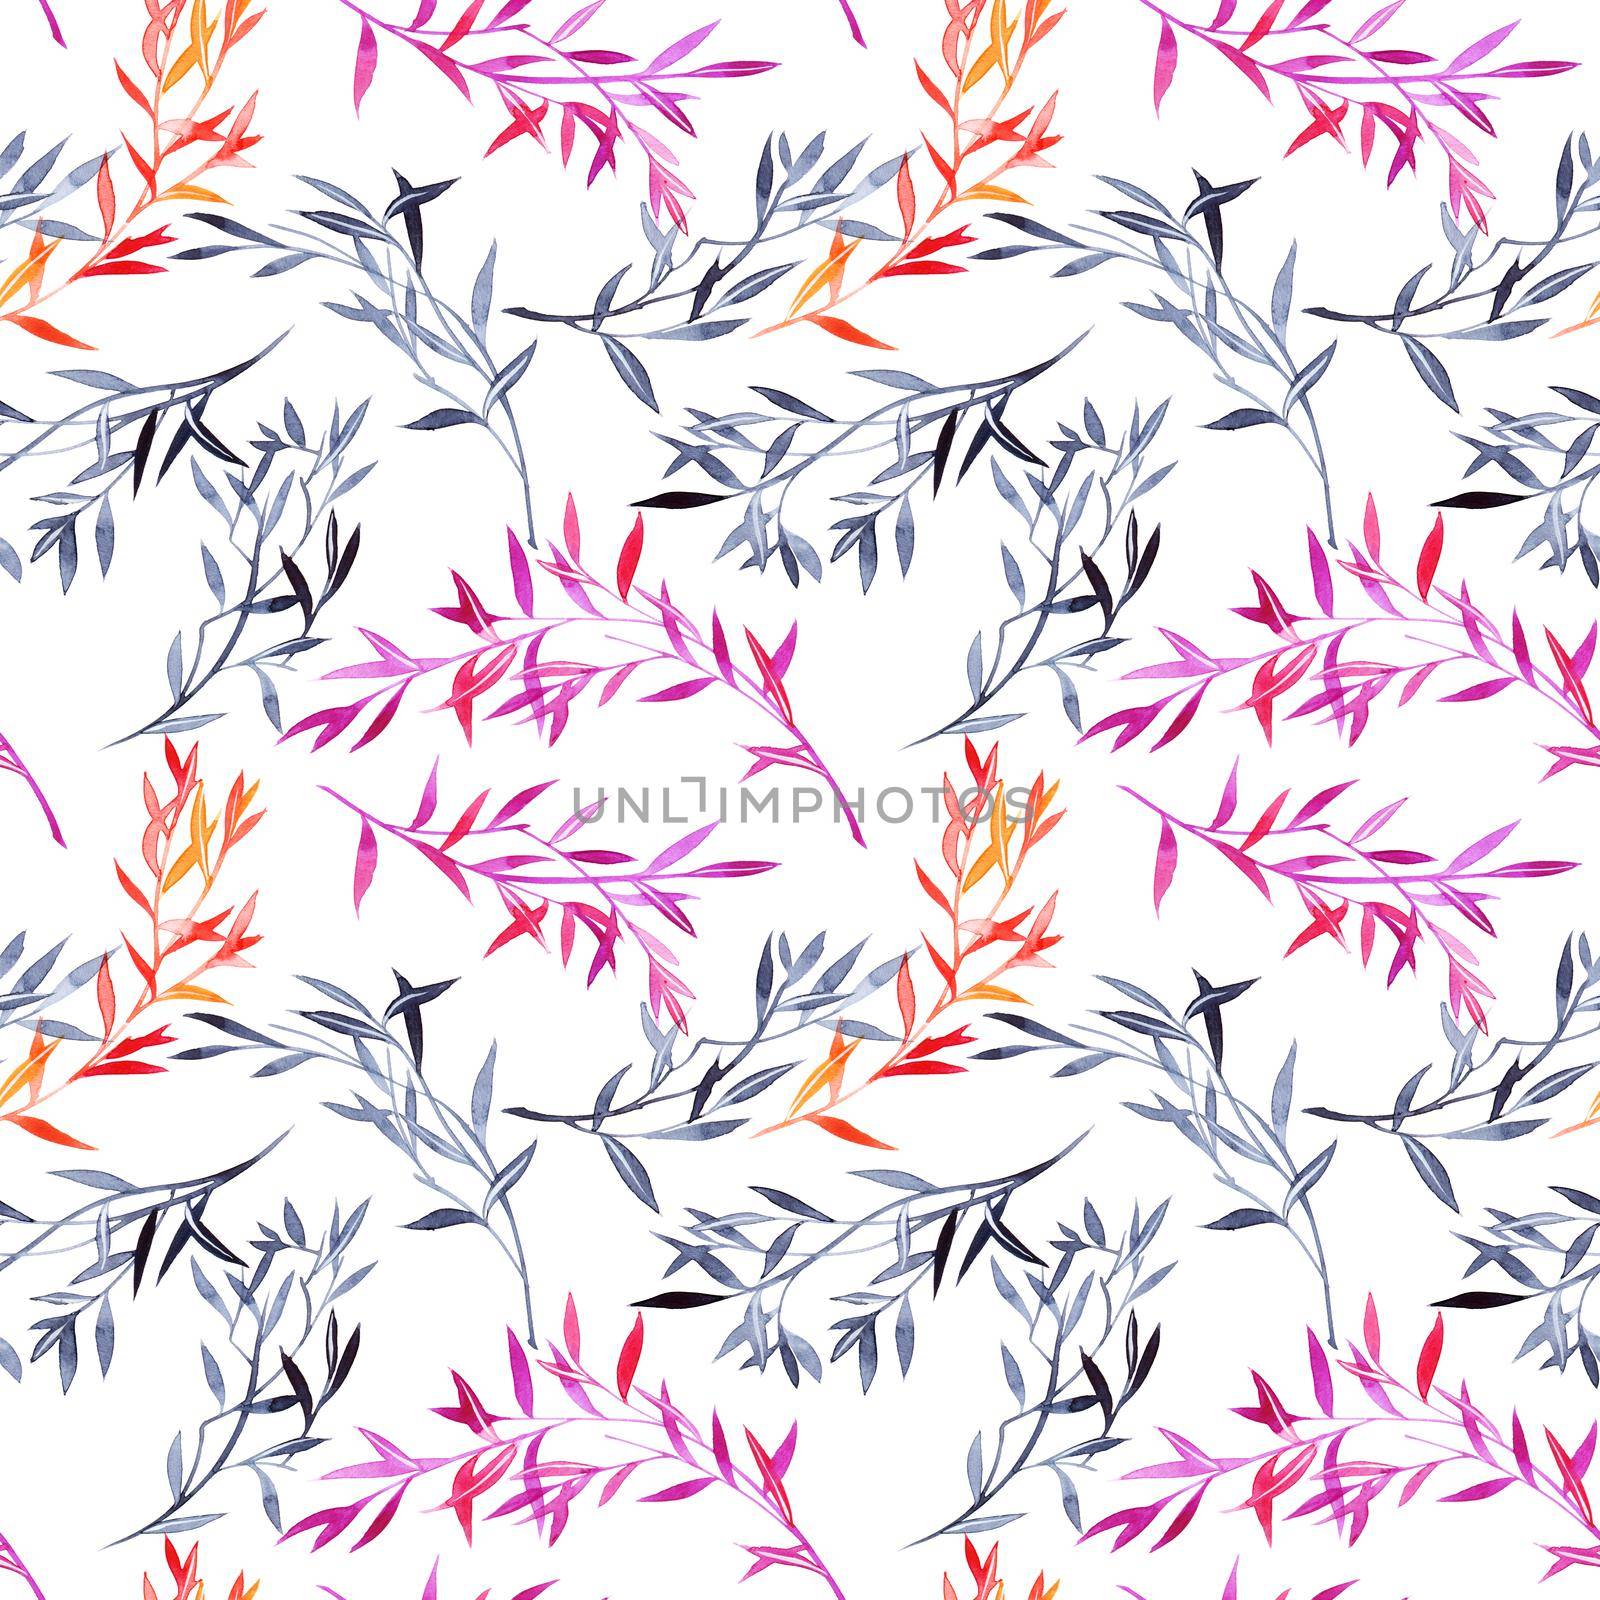 Watercolor seamless pattern of leaves on white background